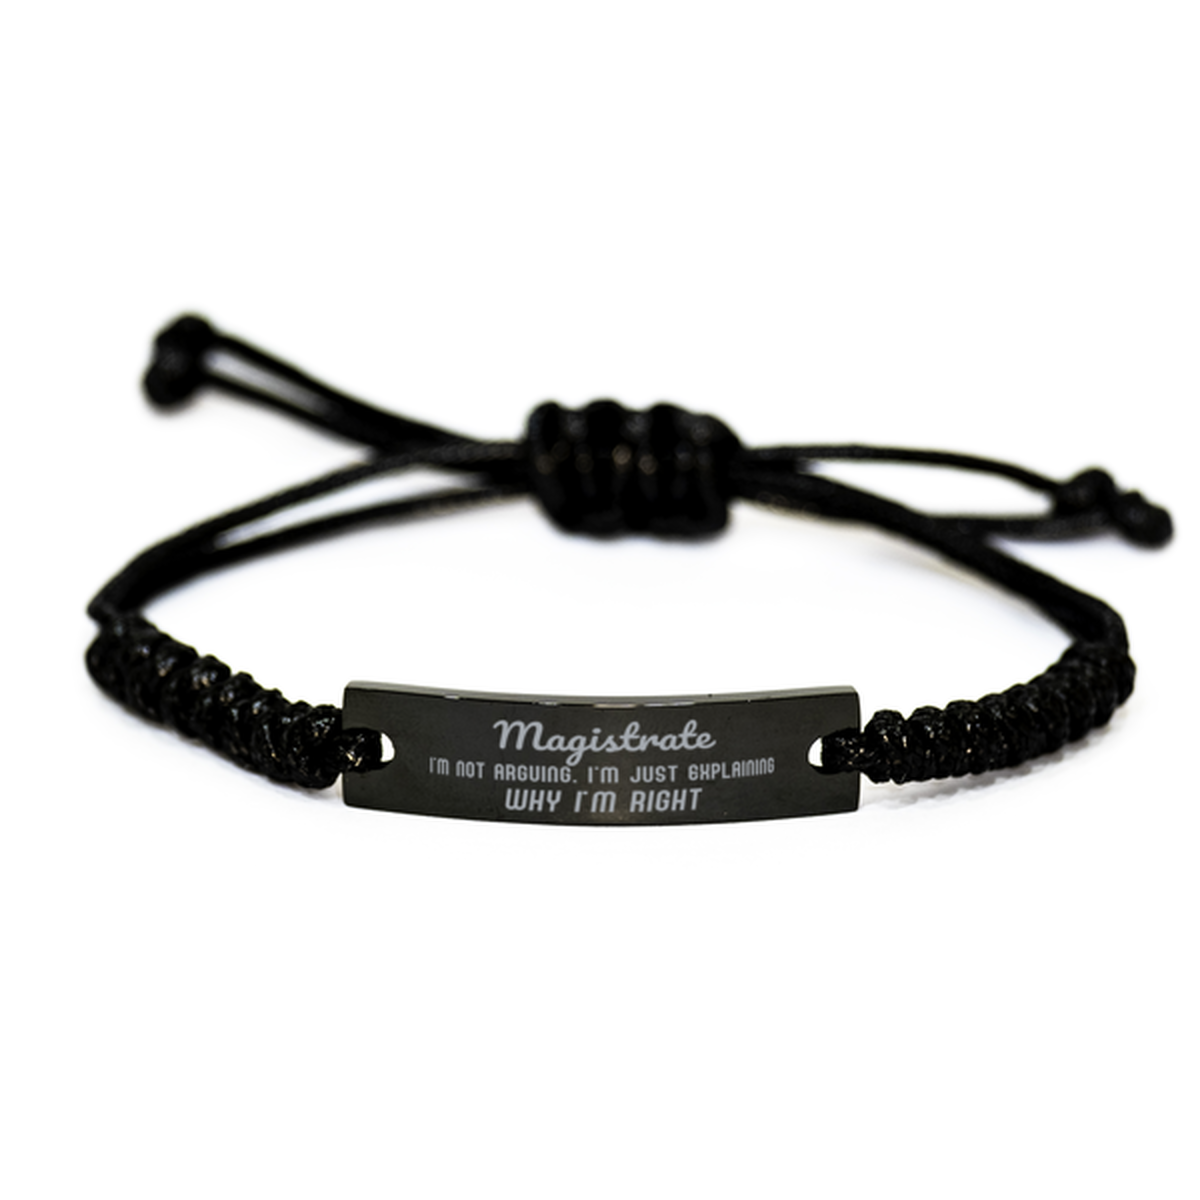 Magistrate I'm not Arguing. I'm Just Explaining Why I'm RIGHT Black Rope Bracelet, Funny Saying Quote Magistrate Gifts For Magistrate Graduation Birthday Christmas Gifts for Men Women Coworker